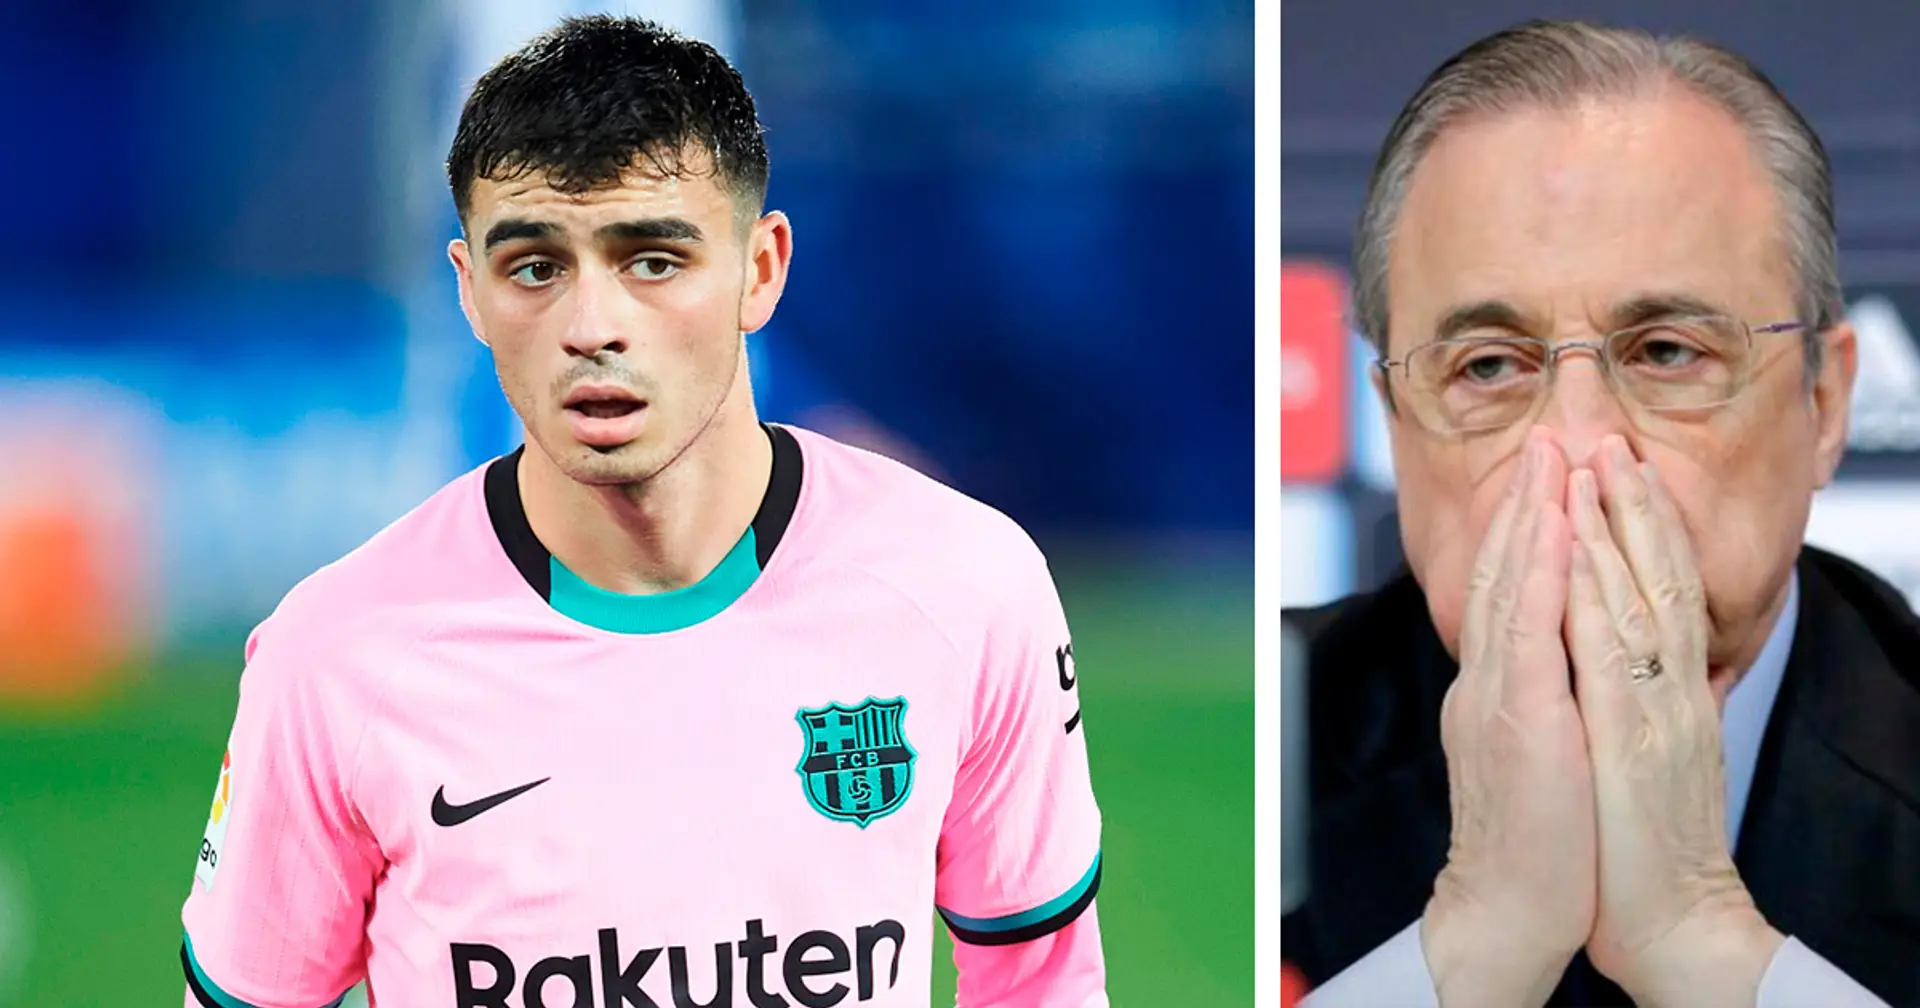 'Barca were against signing him': Pedri's agent reveals hilarious story of how Real Madrid almost snapped teenager up in 2018